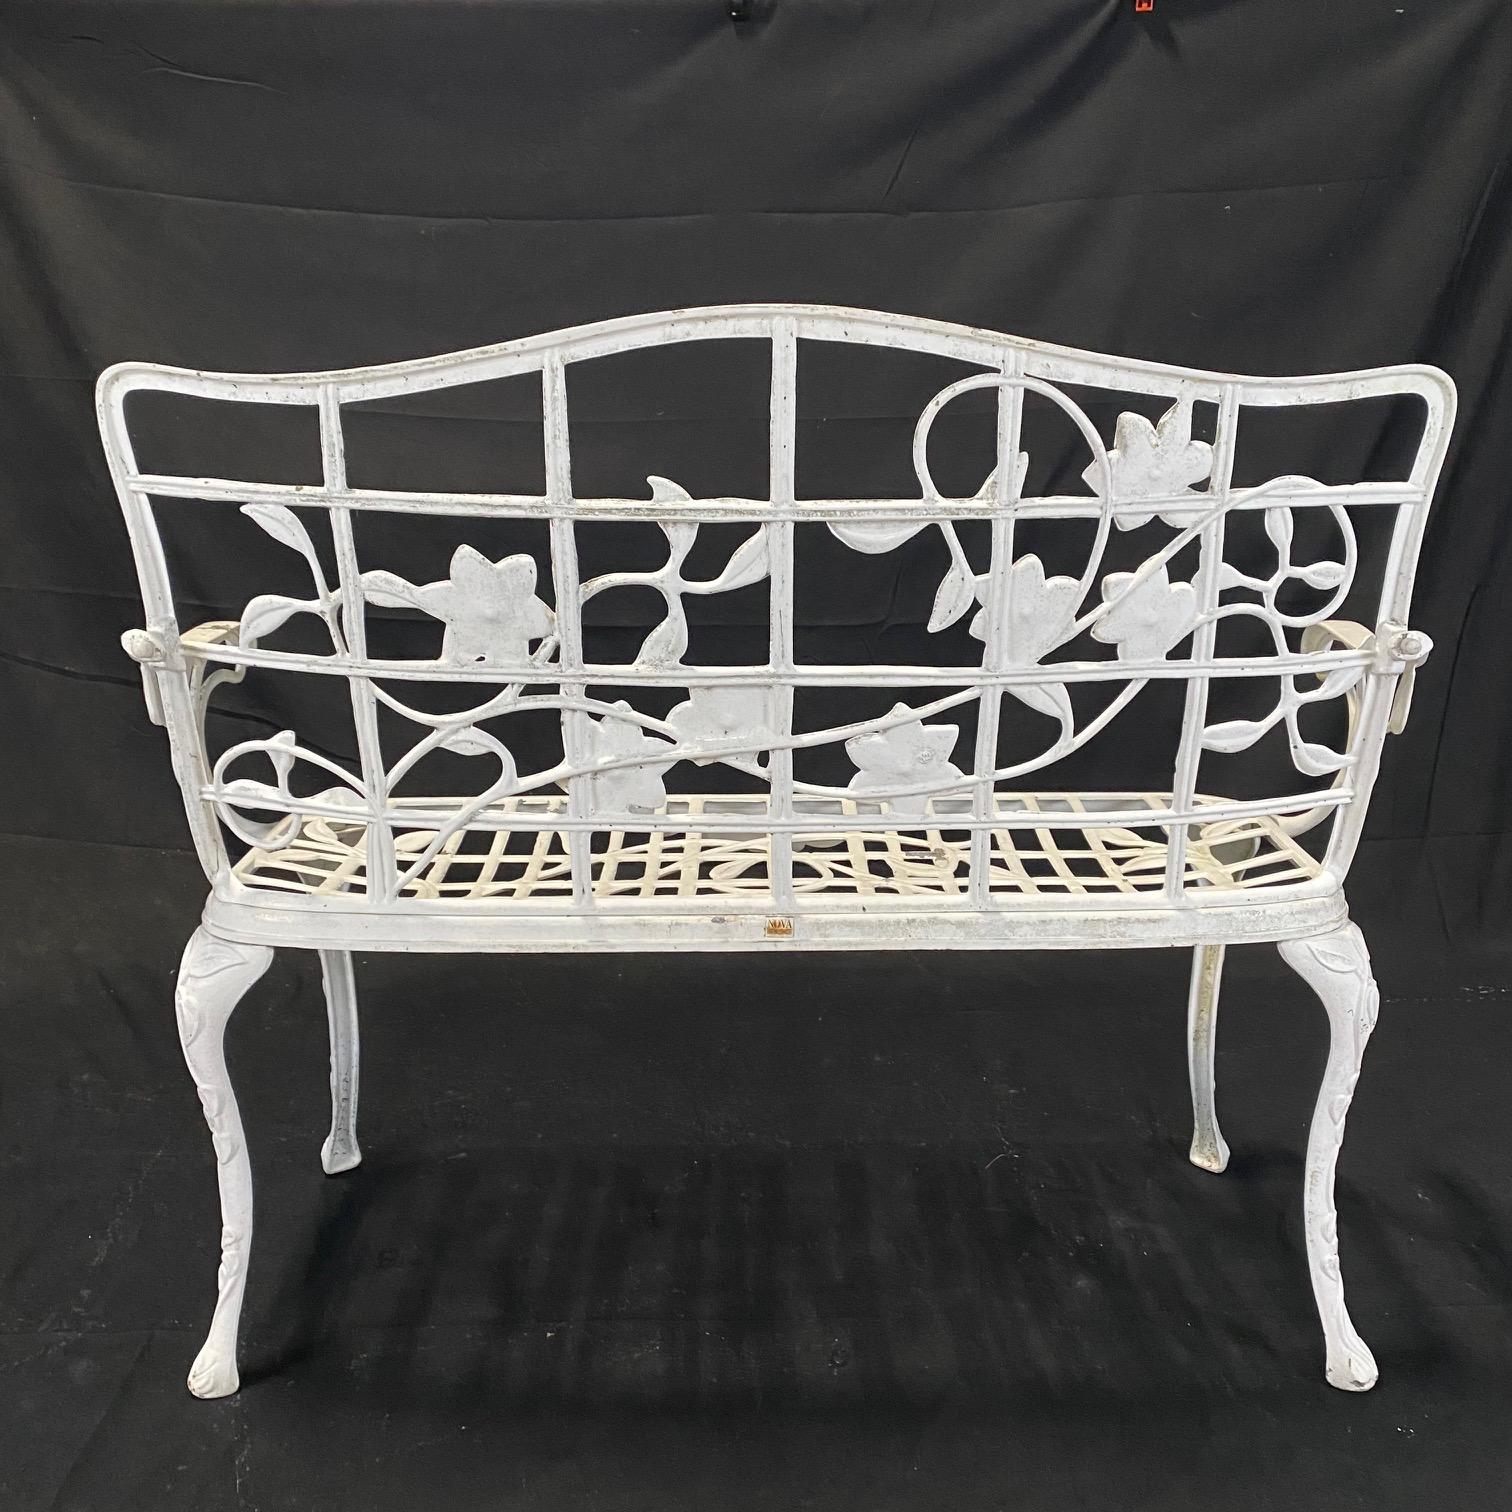 Metal Vintage 5 Piece Set of English Nova Garden Patio Furniture with Vines and Leaves For Sale